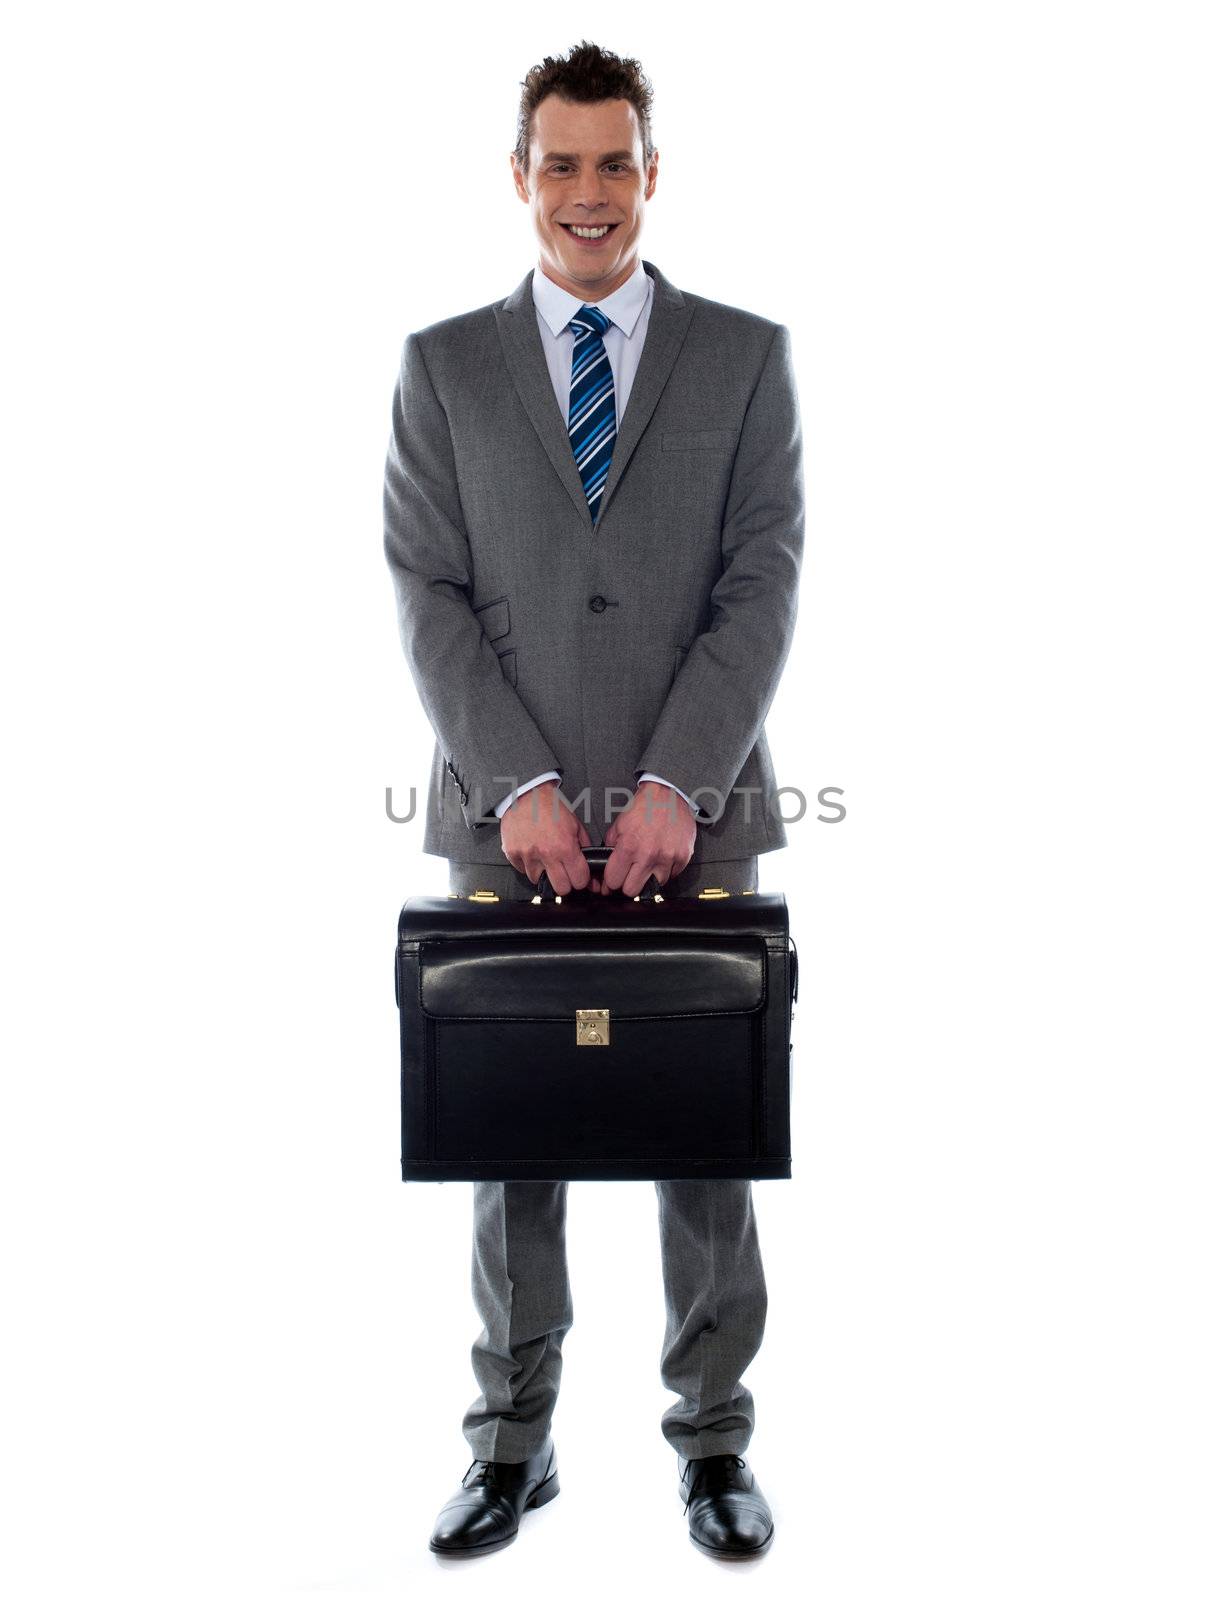 Comany's CEO holding his handbag in front of camera